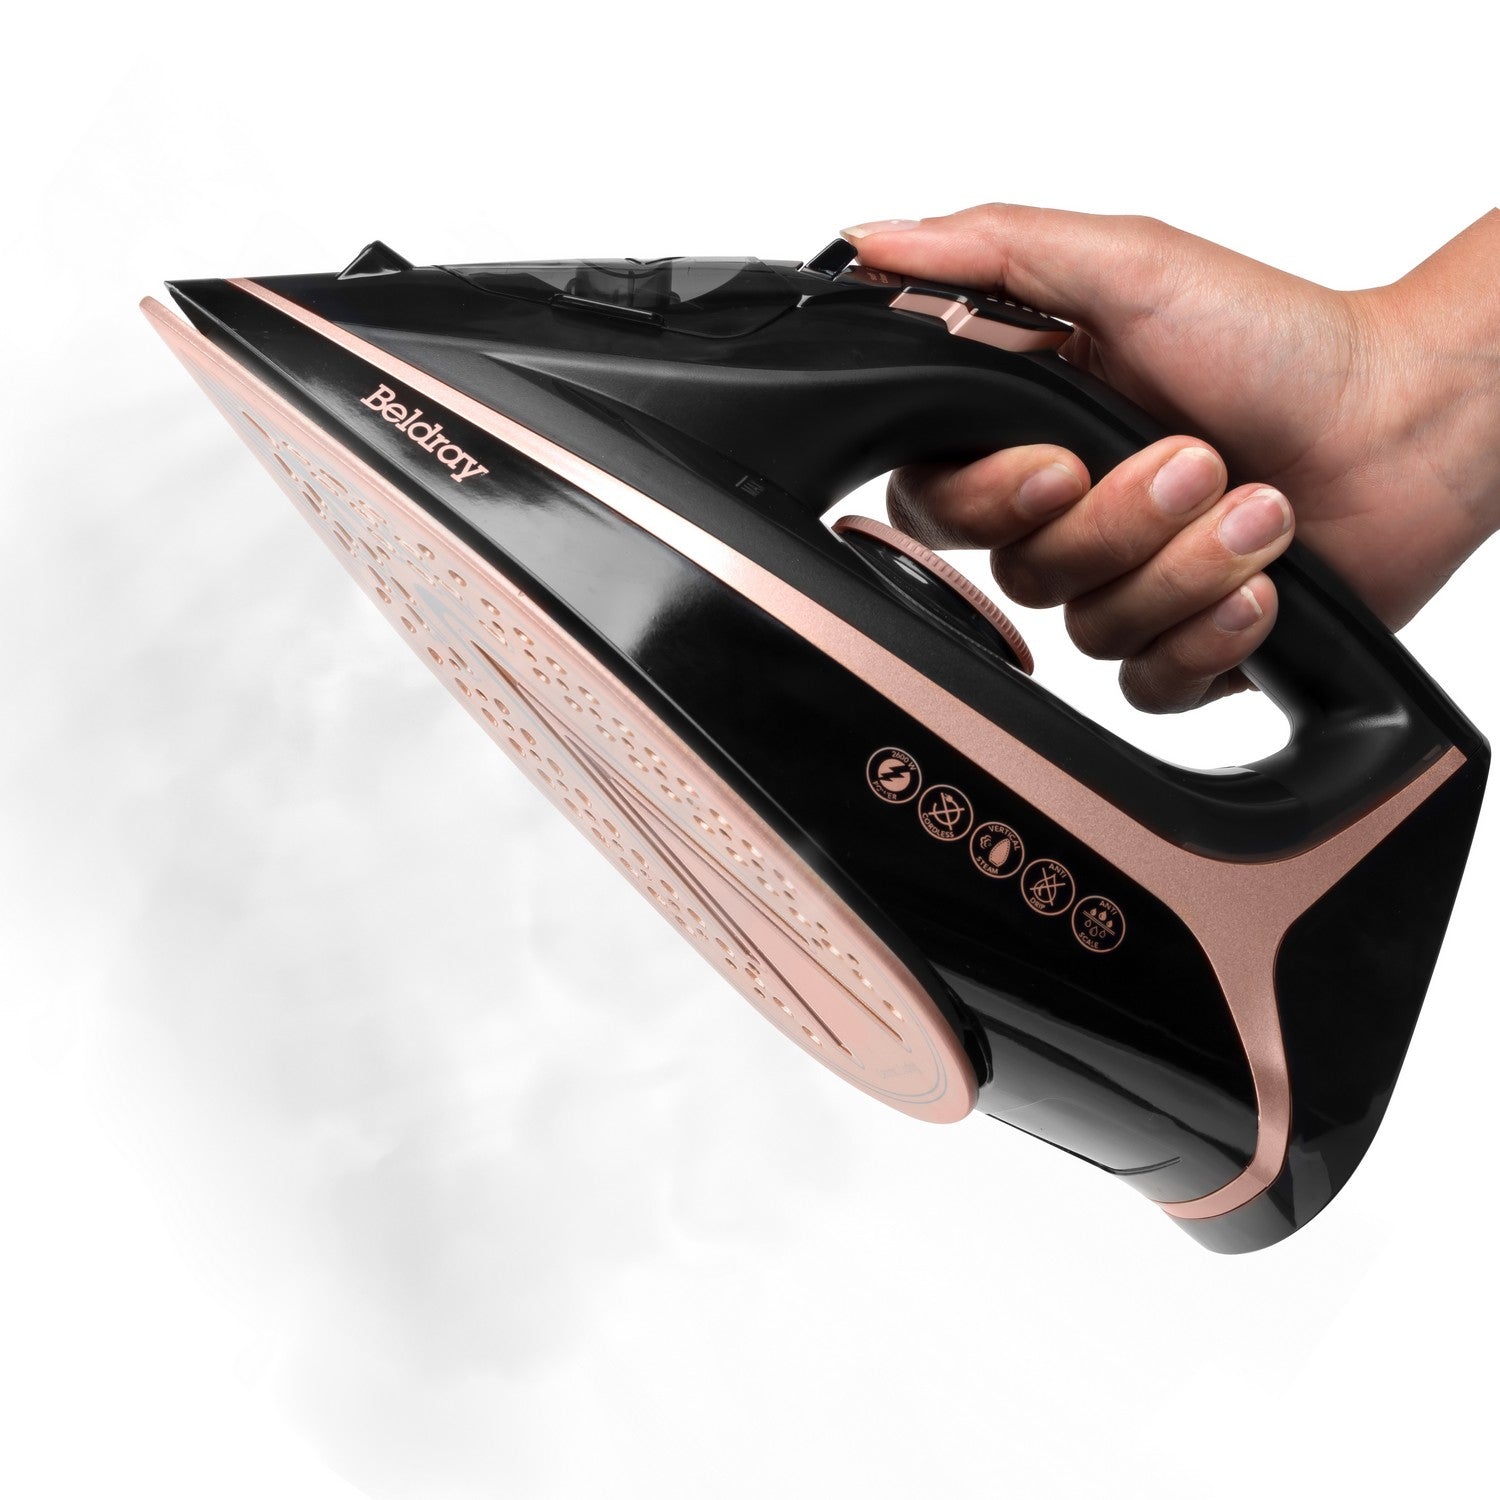 Beldray 2-in-1 Rose Gold Edition Cordless Iron